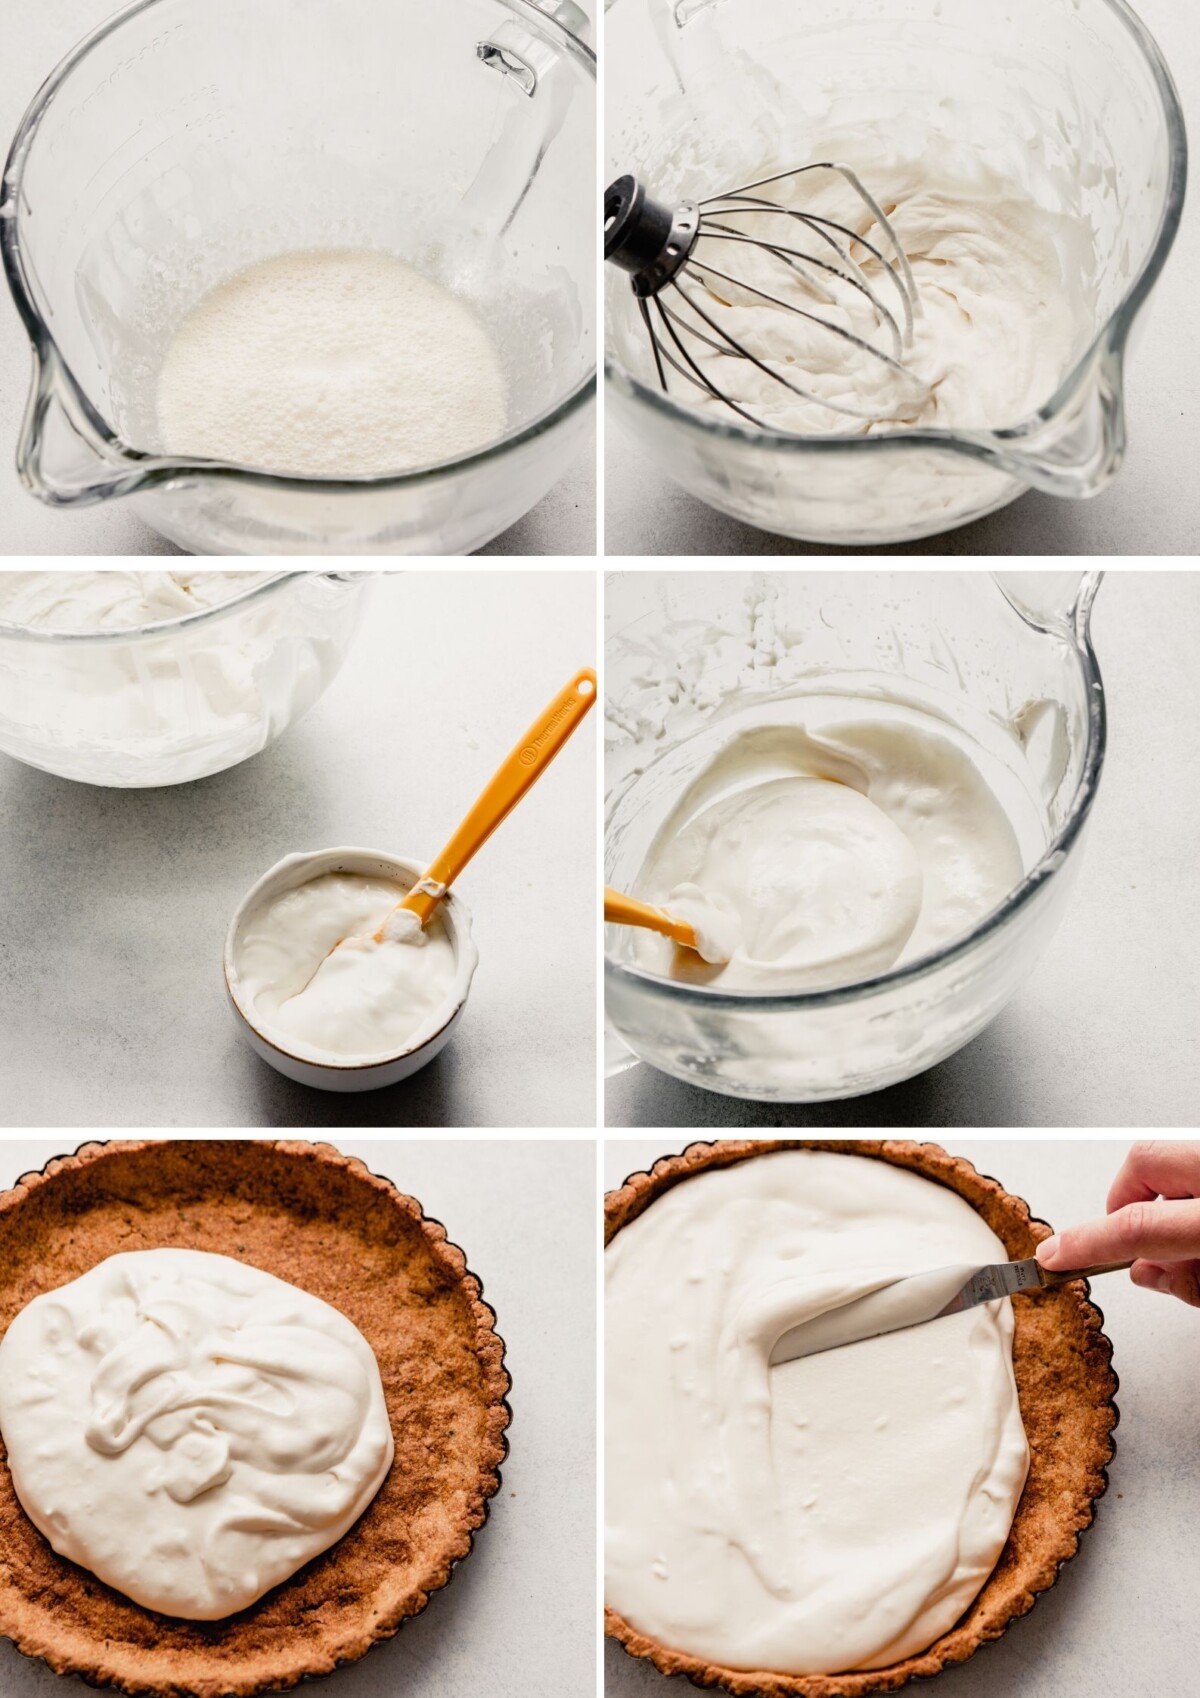 grid of images showing the process for making the whipped filling—whipping the cream to stiff peaks, combining the cream with mascarpone, spreading filling into tart crust